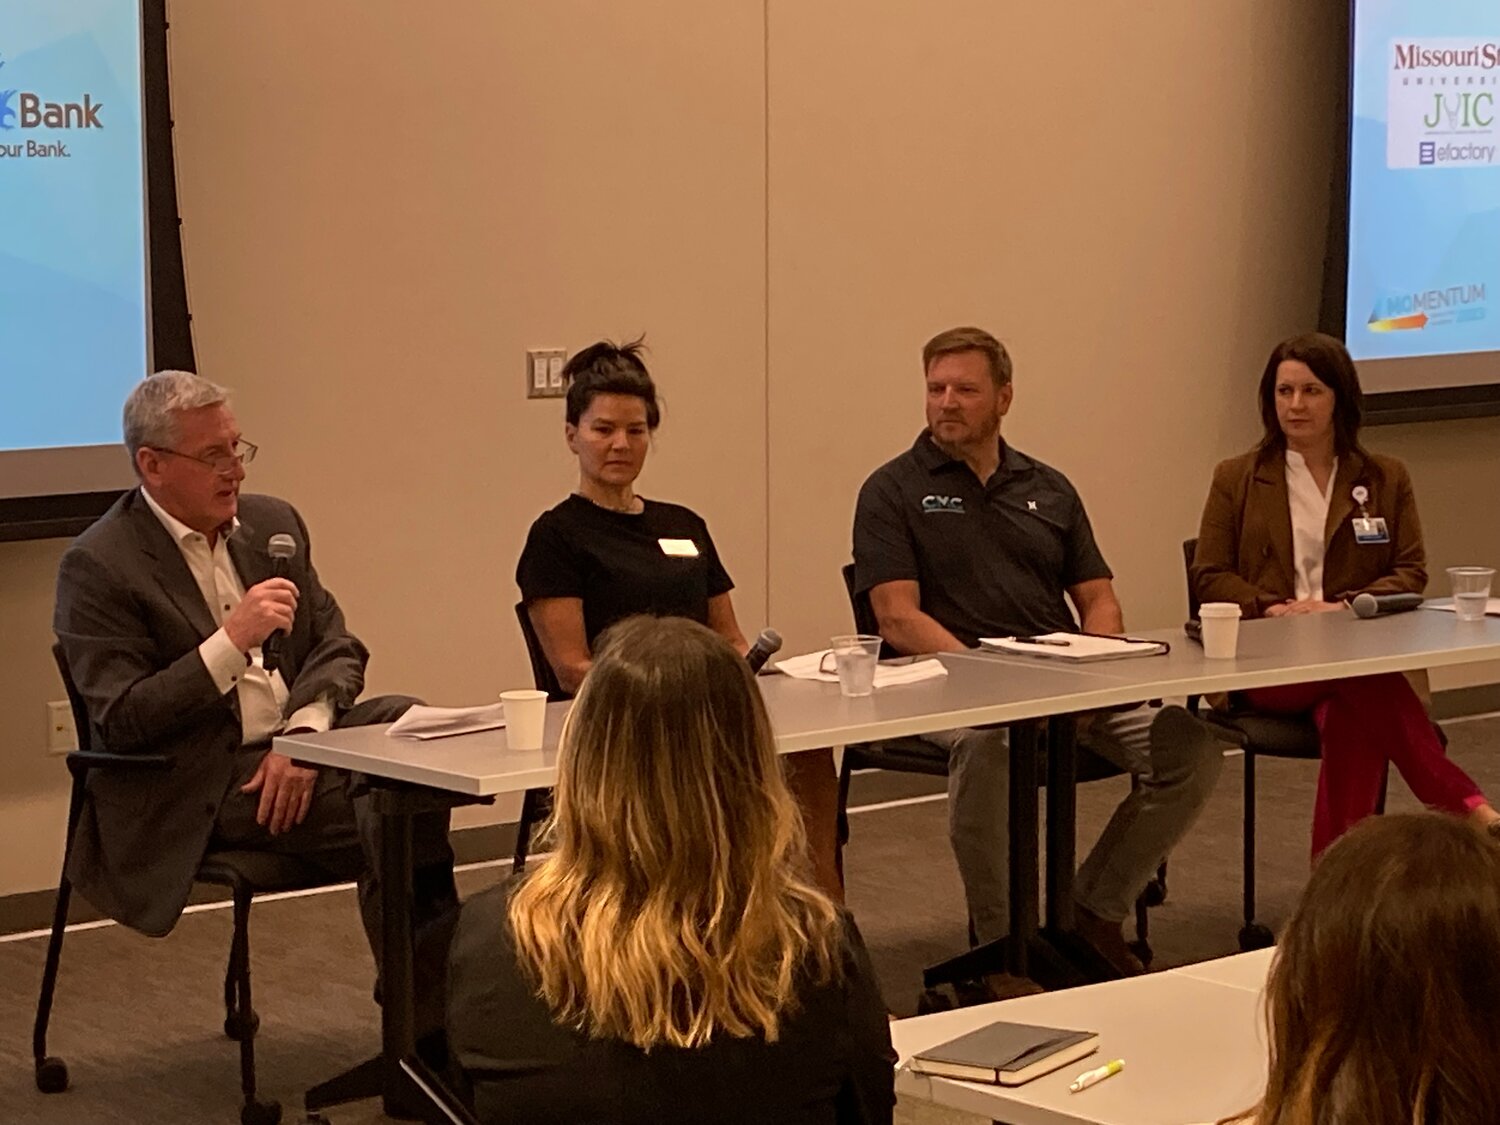 TALENT ATTRACTION: At left, Mark McNay of SMC Packaging Group speaks on ways his company attracts talent, as panelists Shelly Phillips, Lee Loveall and Katelyn Lenhart listen.